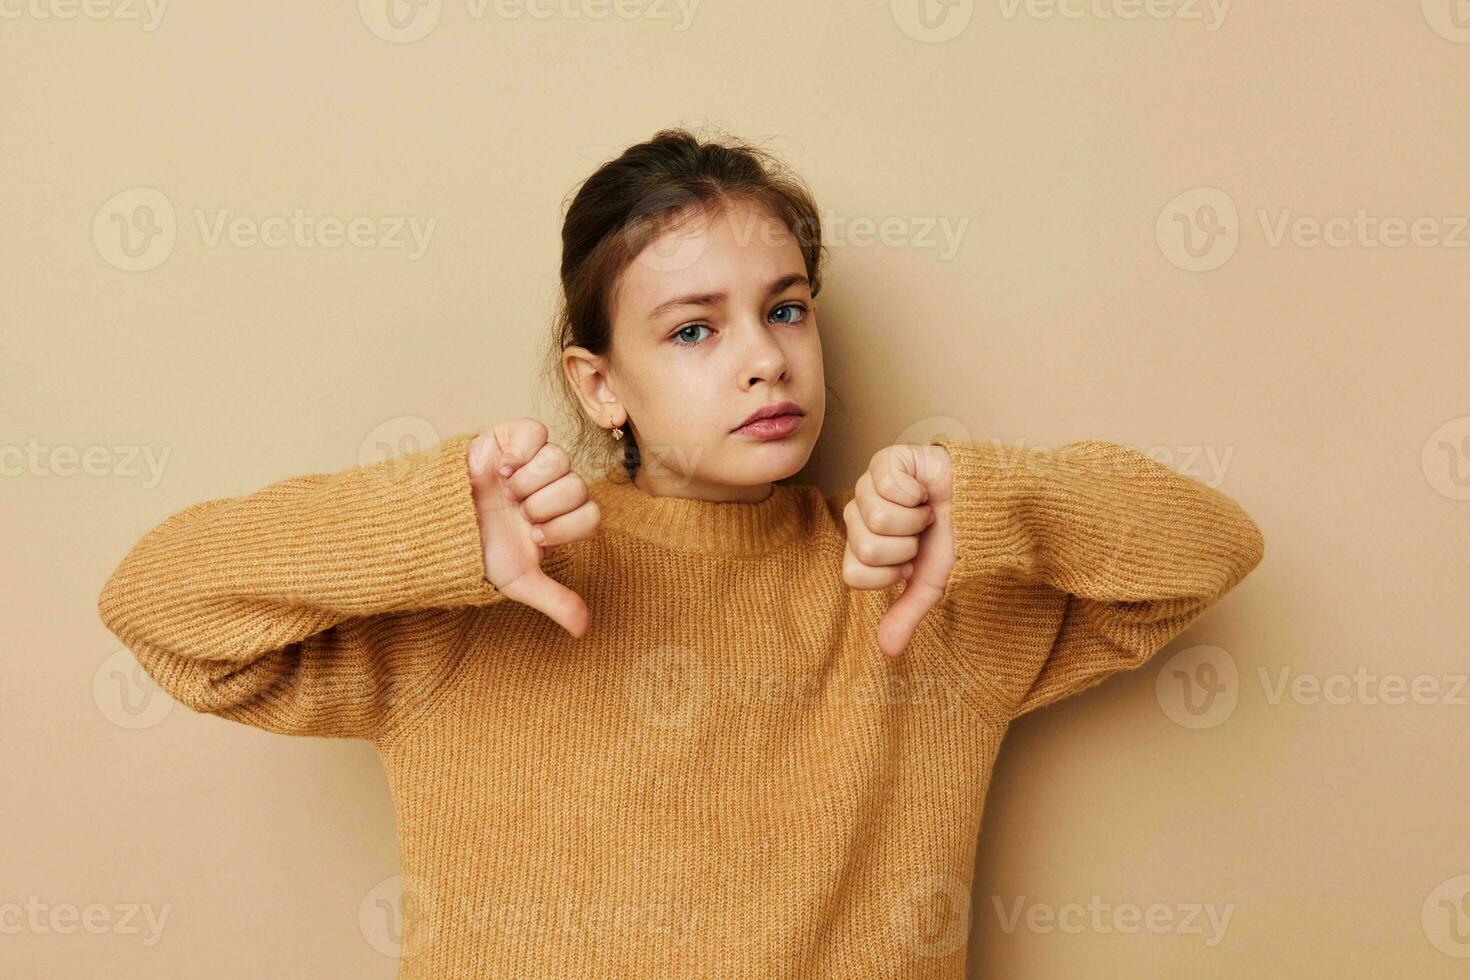 Portrait of happy smiling child girl in sweater posing hand gestures childhood unaltered photo